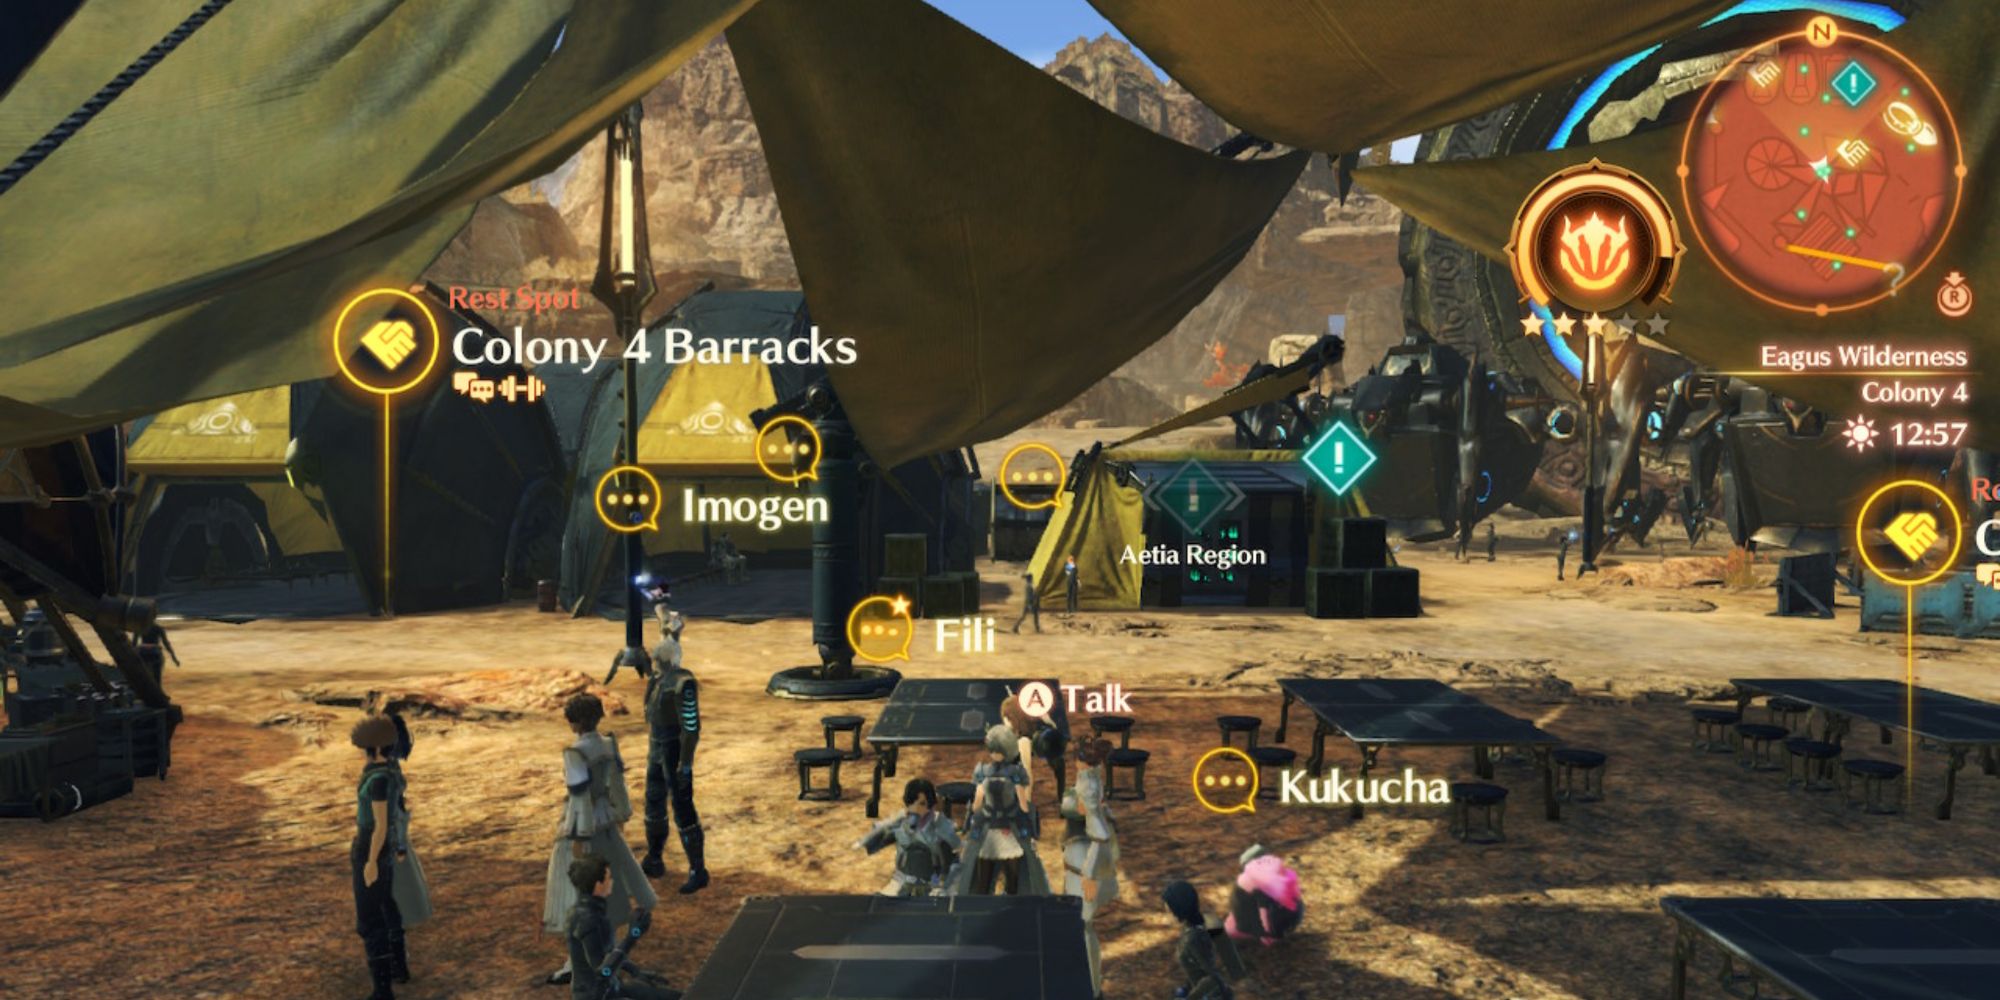 Speaking with Colony NPCs in Xenoblade Chronicles 3